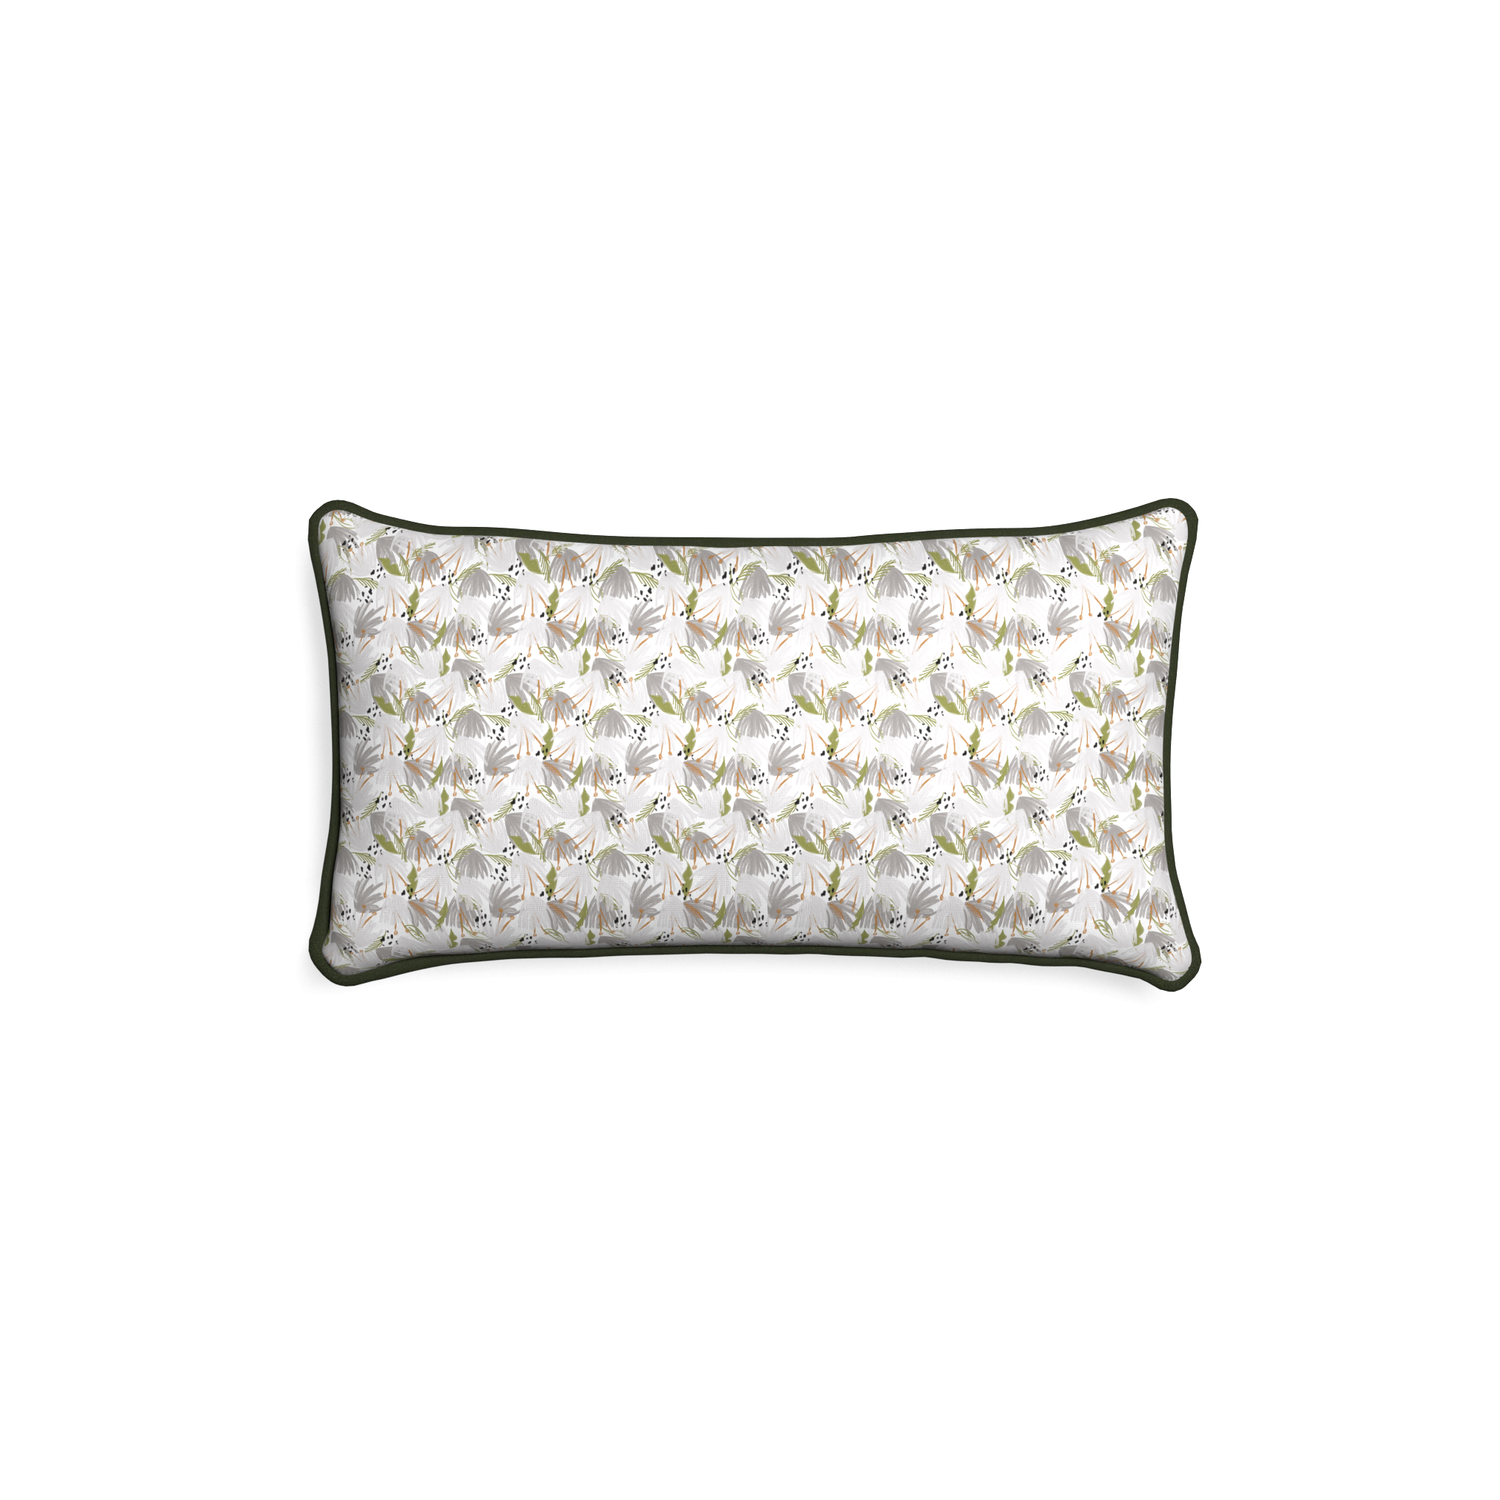 Petite-lumbar eden grey custom grey floralpillow with f piping on white background